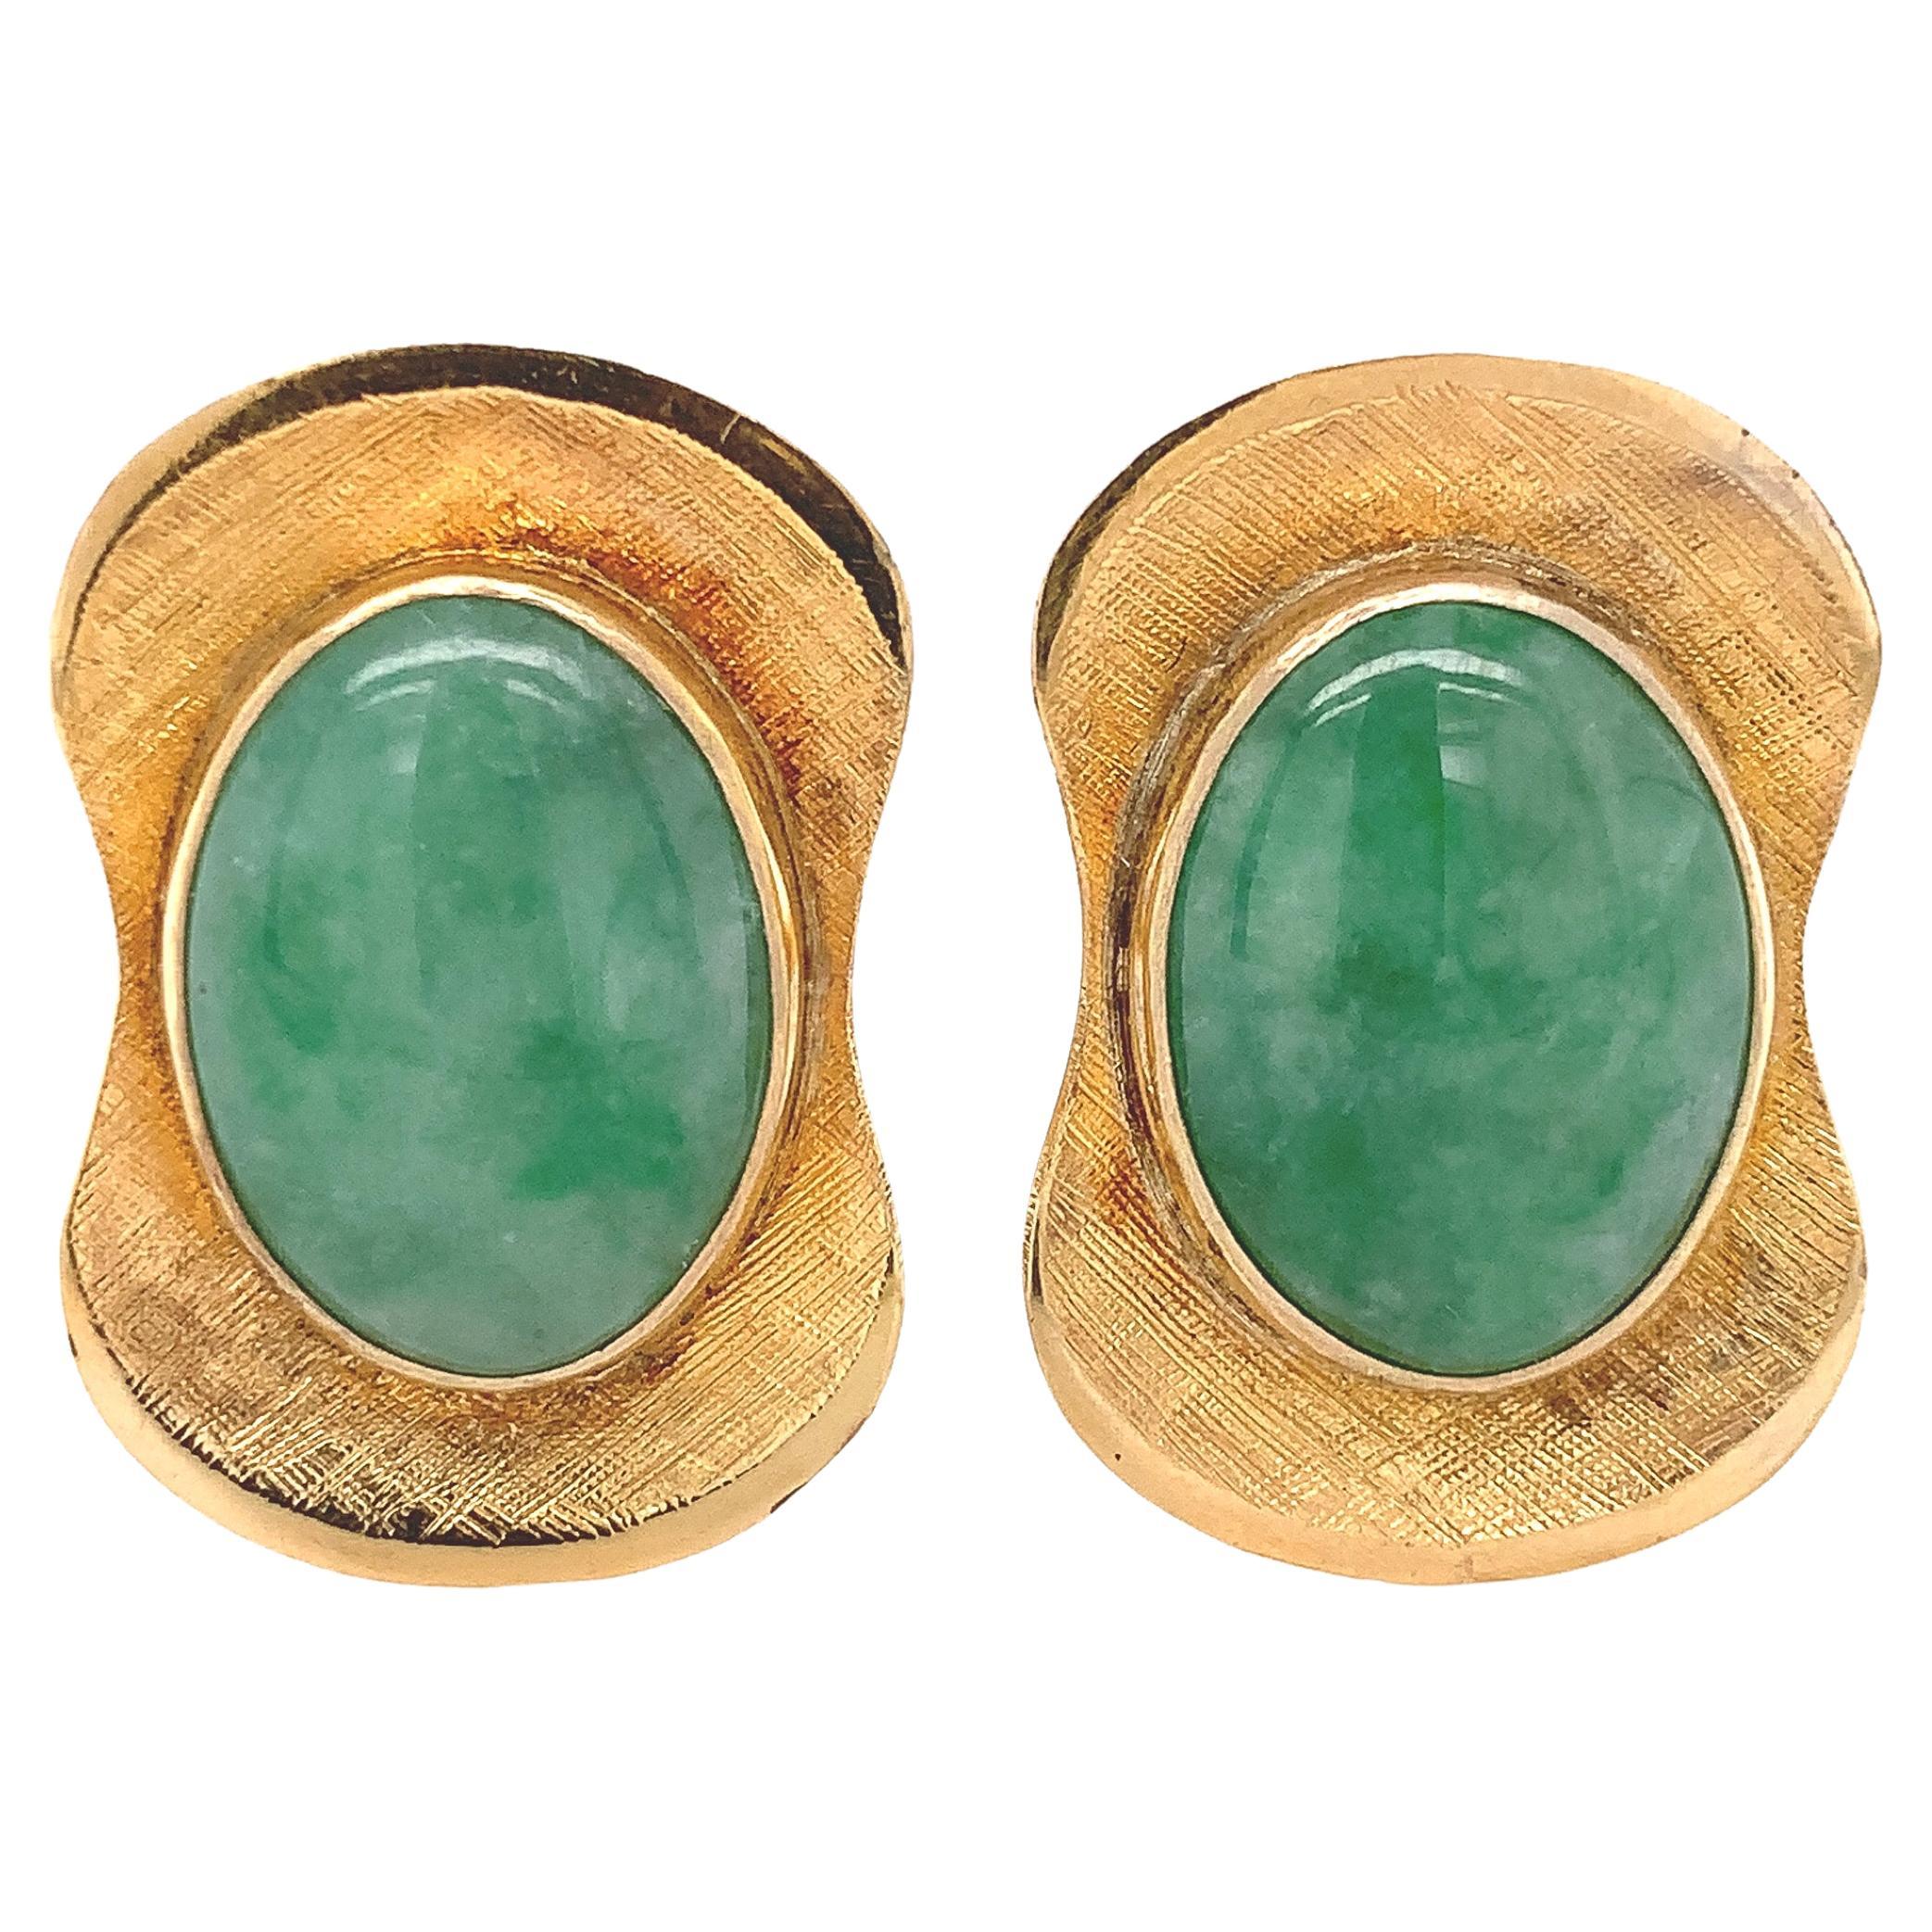 Pair of 14K Gold A Jadeite Jade Cufflinks with GIA Report